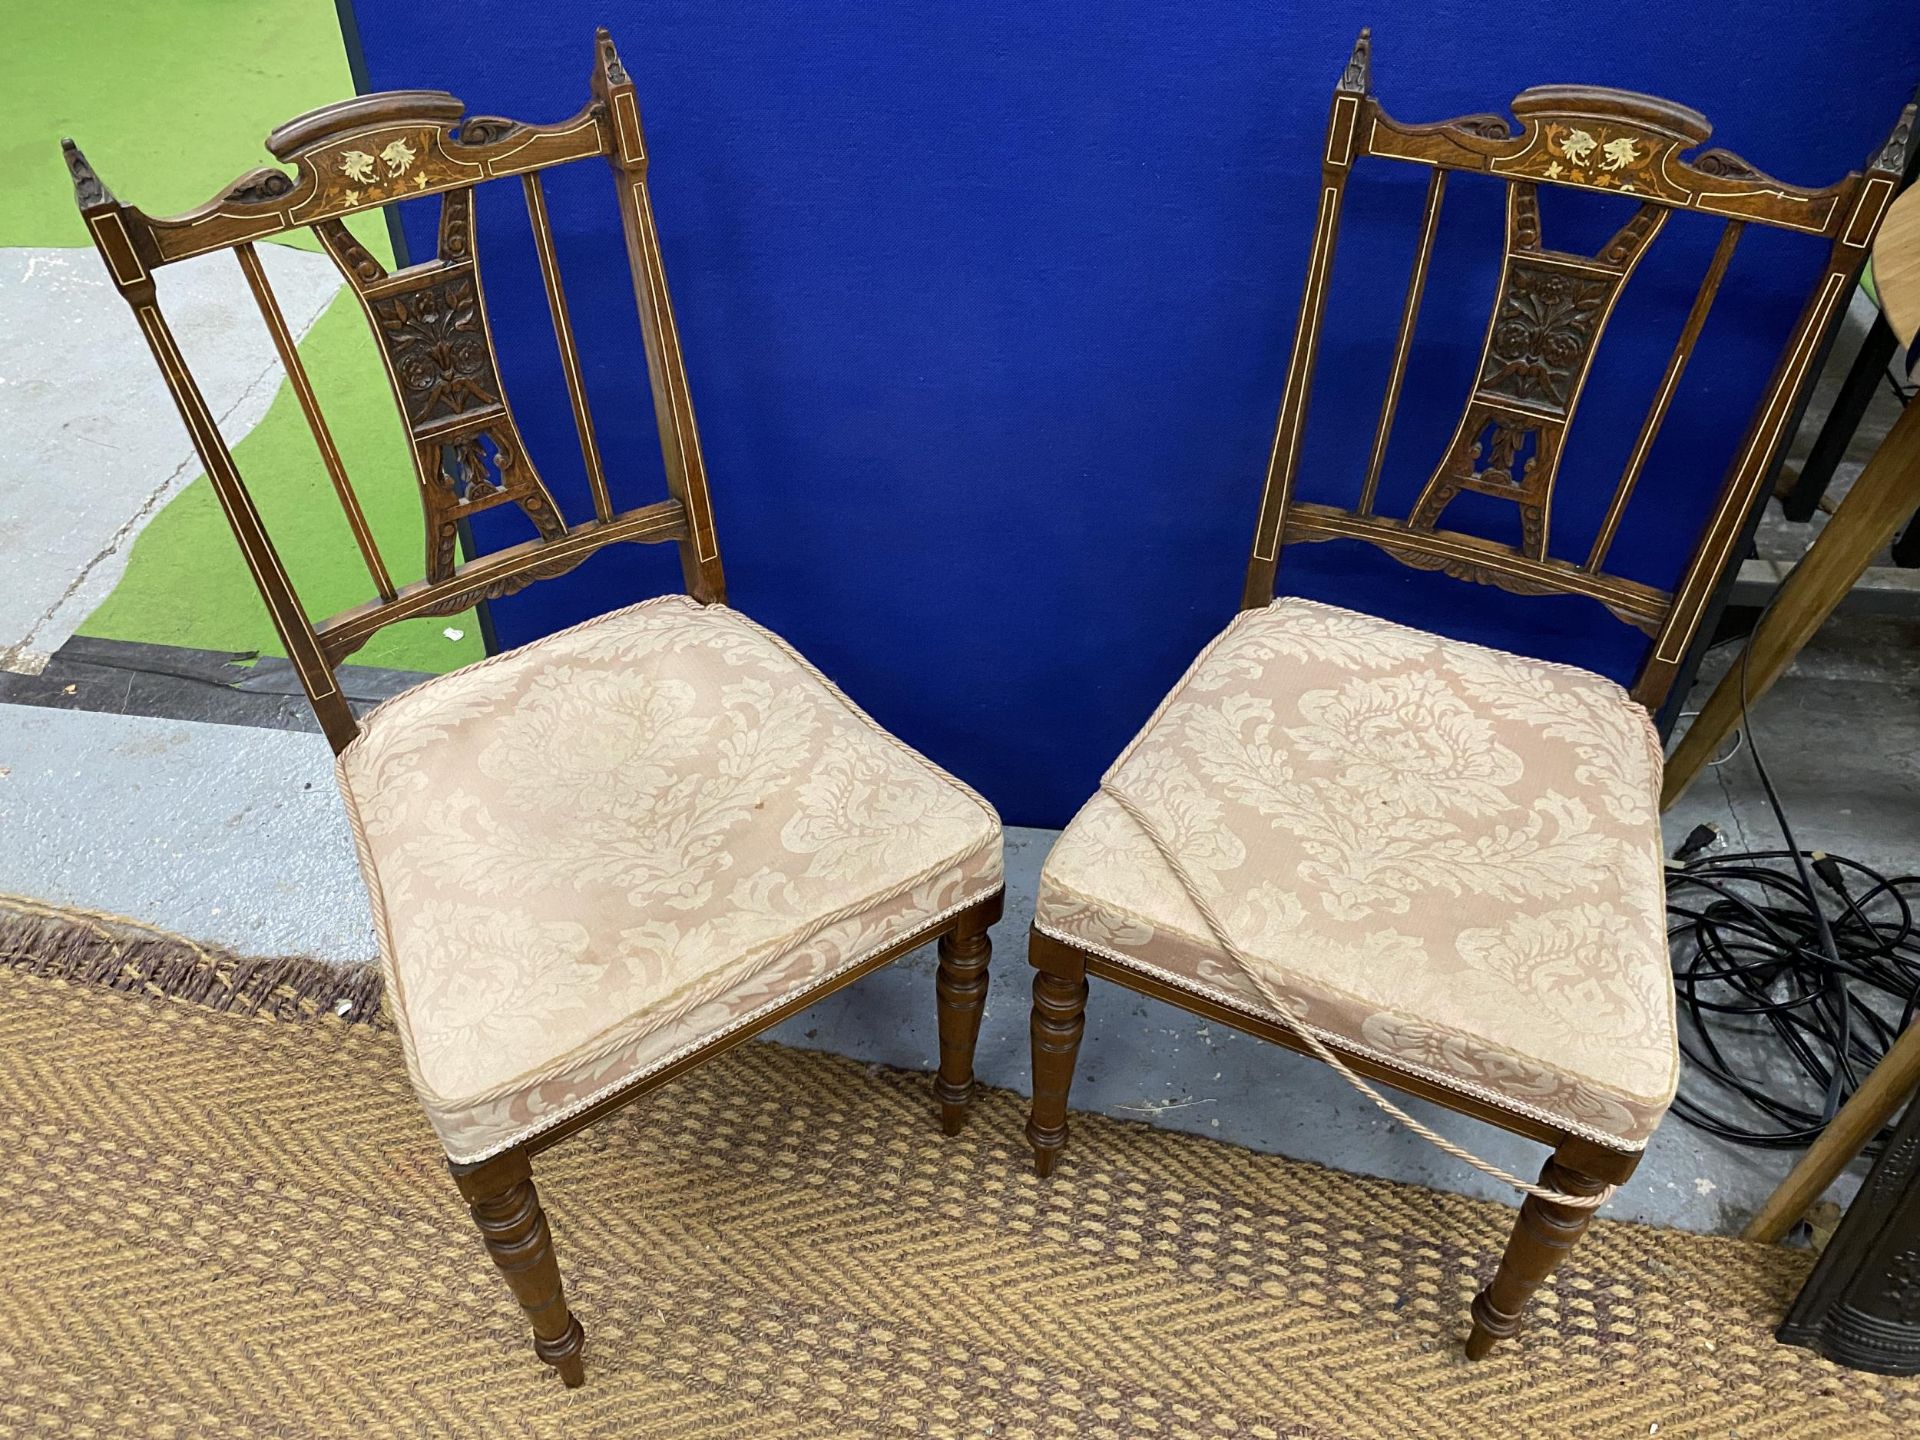 A PAIR OF EDWARDIAN INLAID BEDROOM CHAIRS